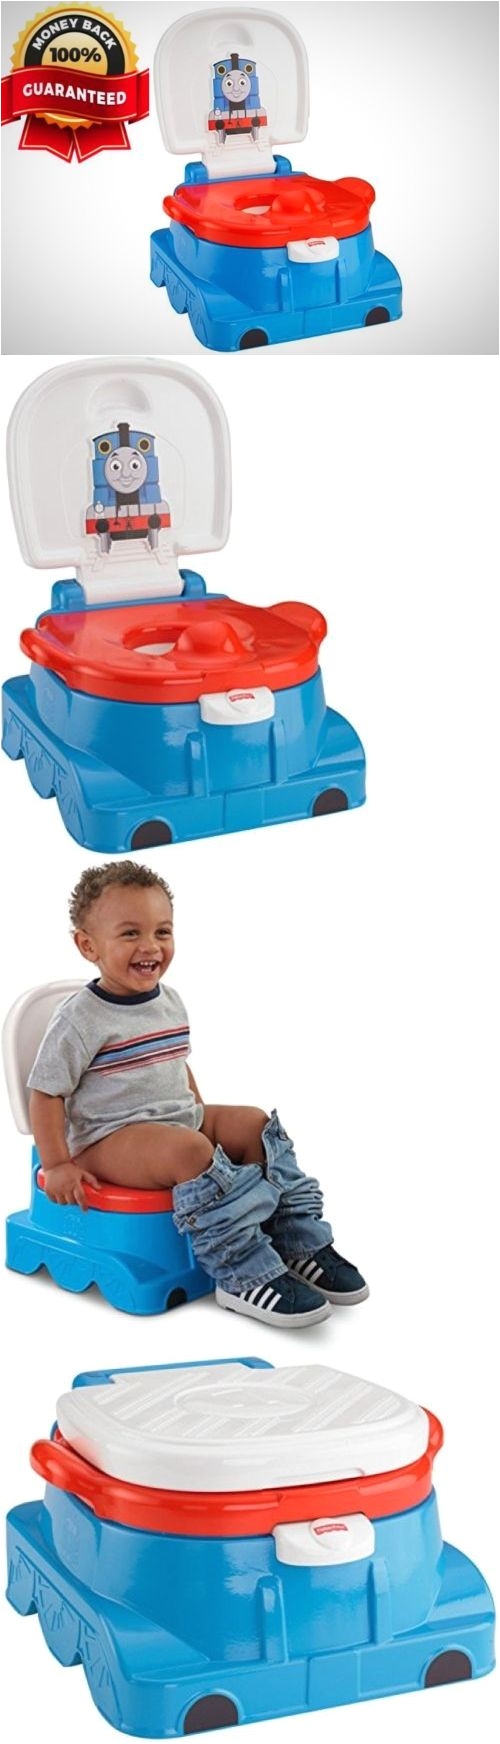 Fisher Price Potty Chair toys R Us 7 Best Hammering Pounding toys Baby toddler toys toys Games